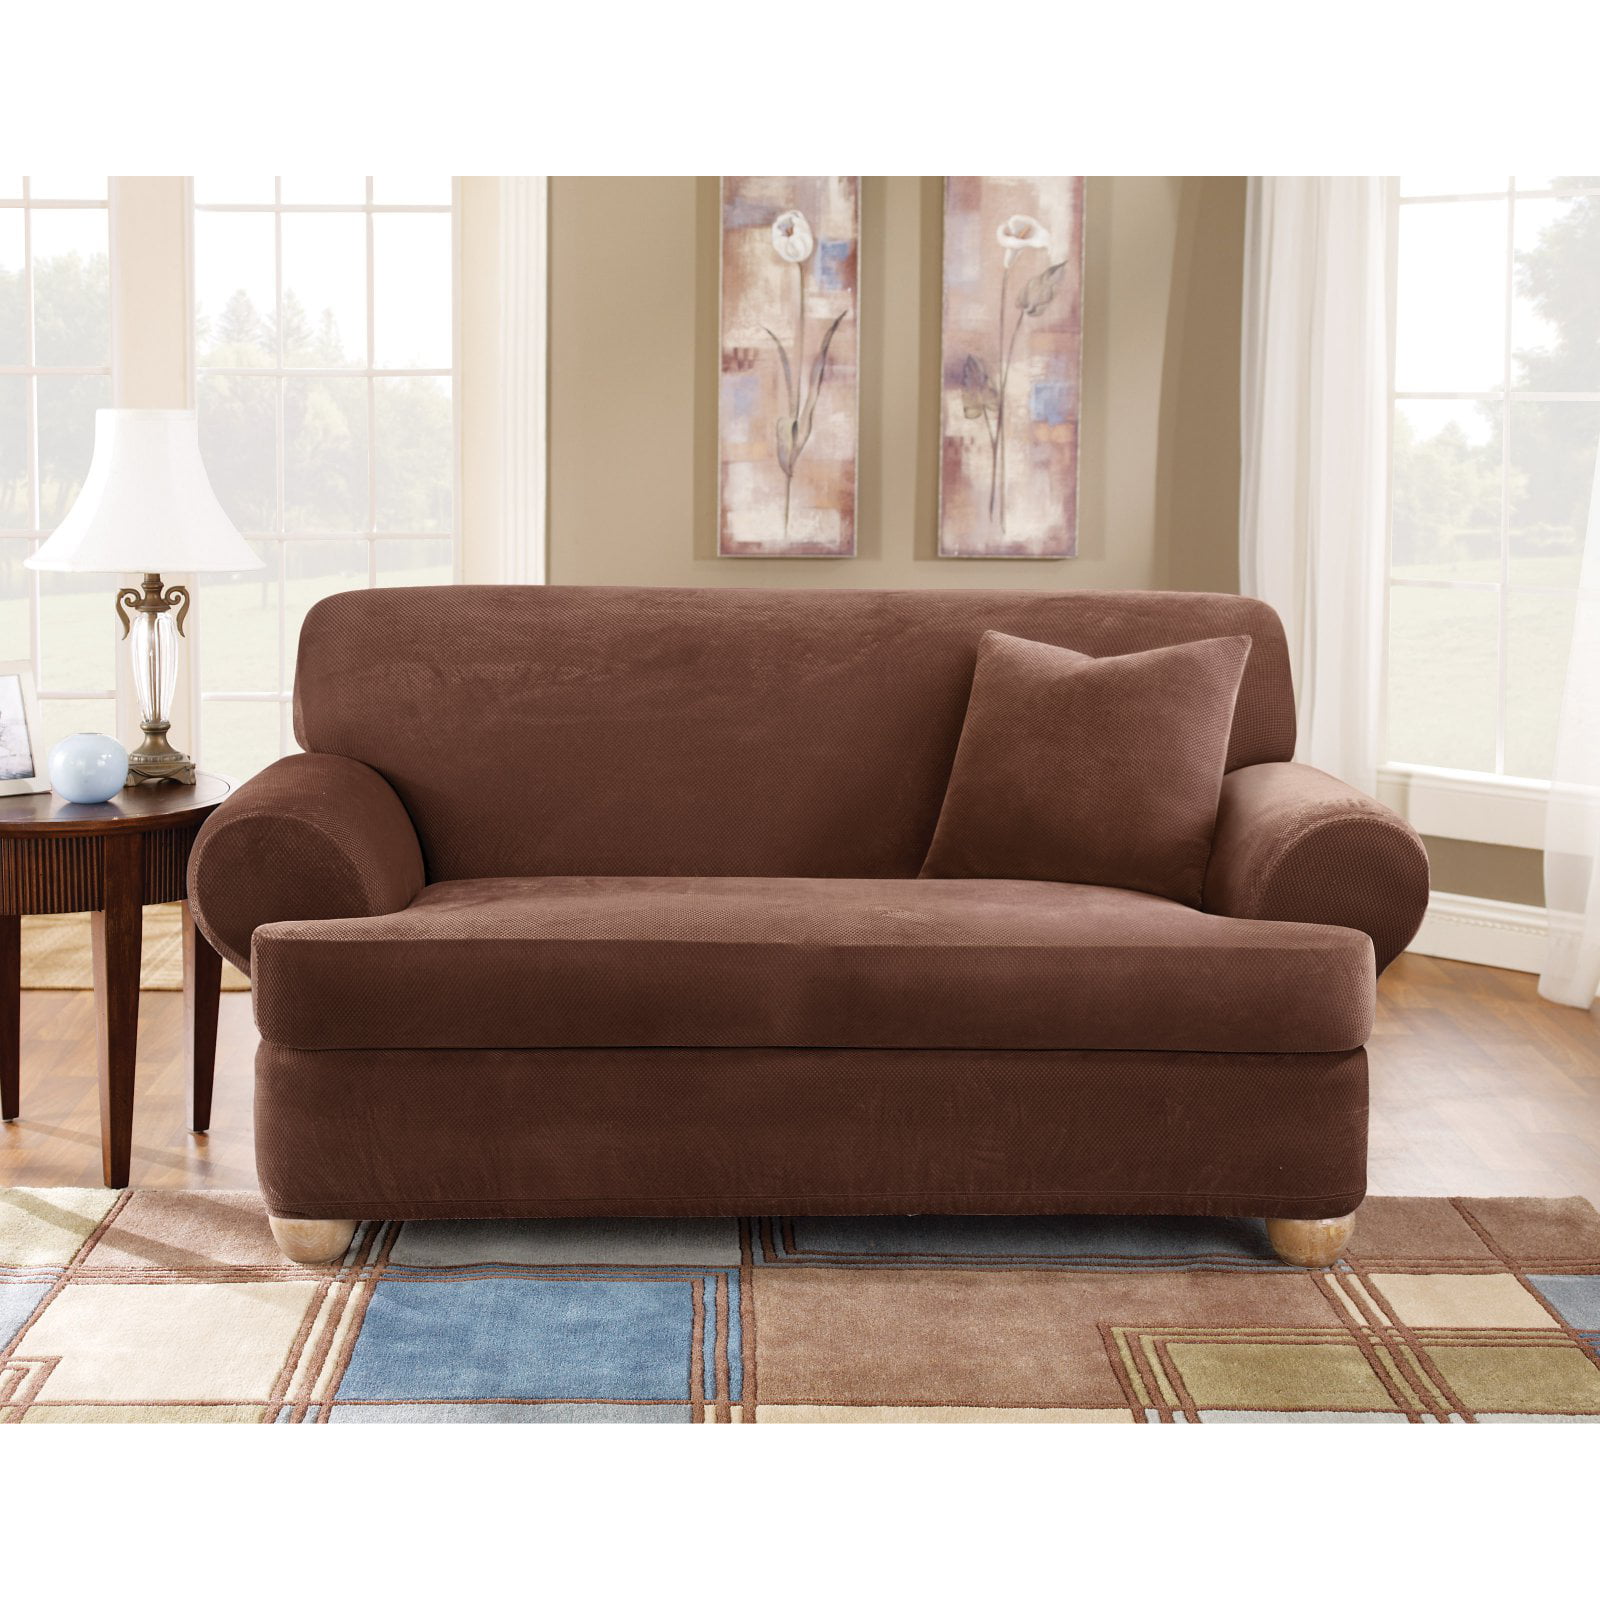 COUCH COVER-ALSO IN 6 OTHER COLORS--A GREAT PICK PIQUE T CUSHION BURGUNDY SOFA 